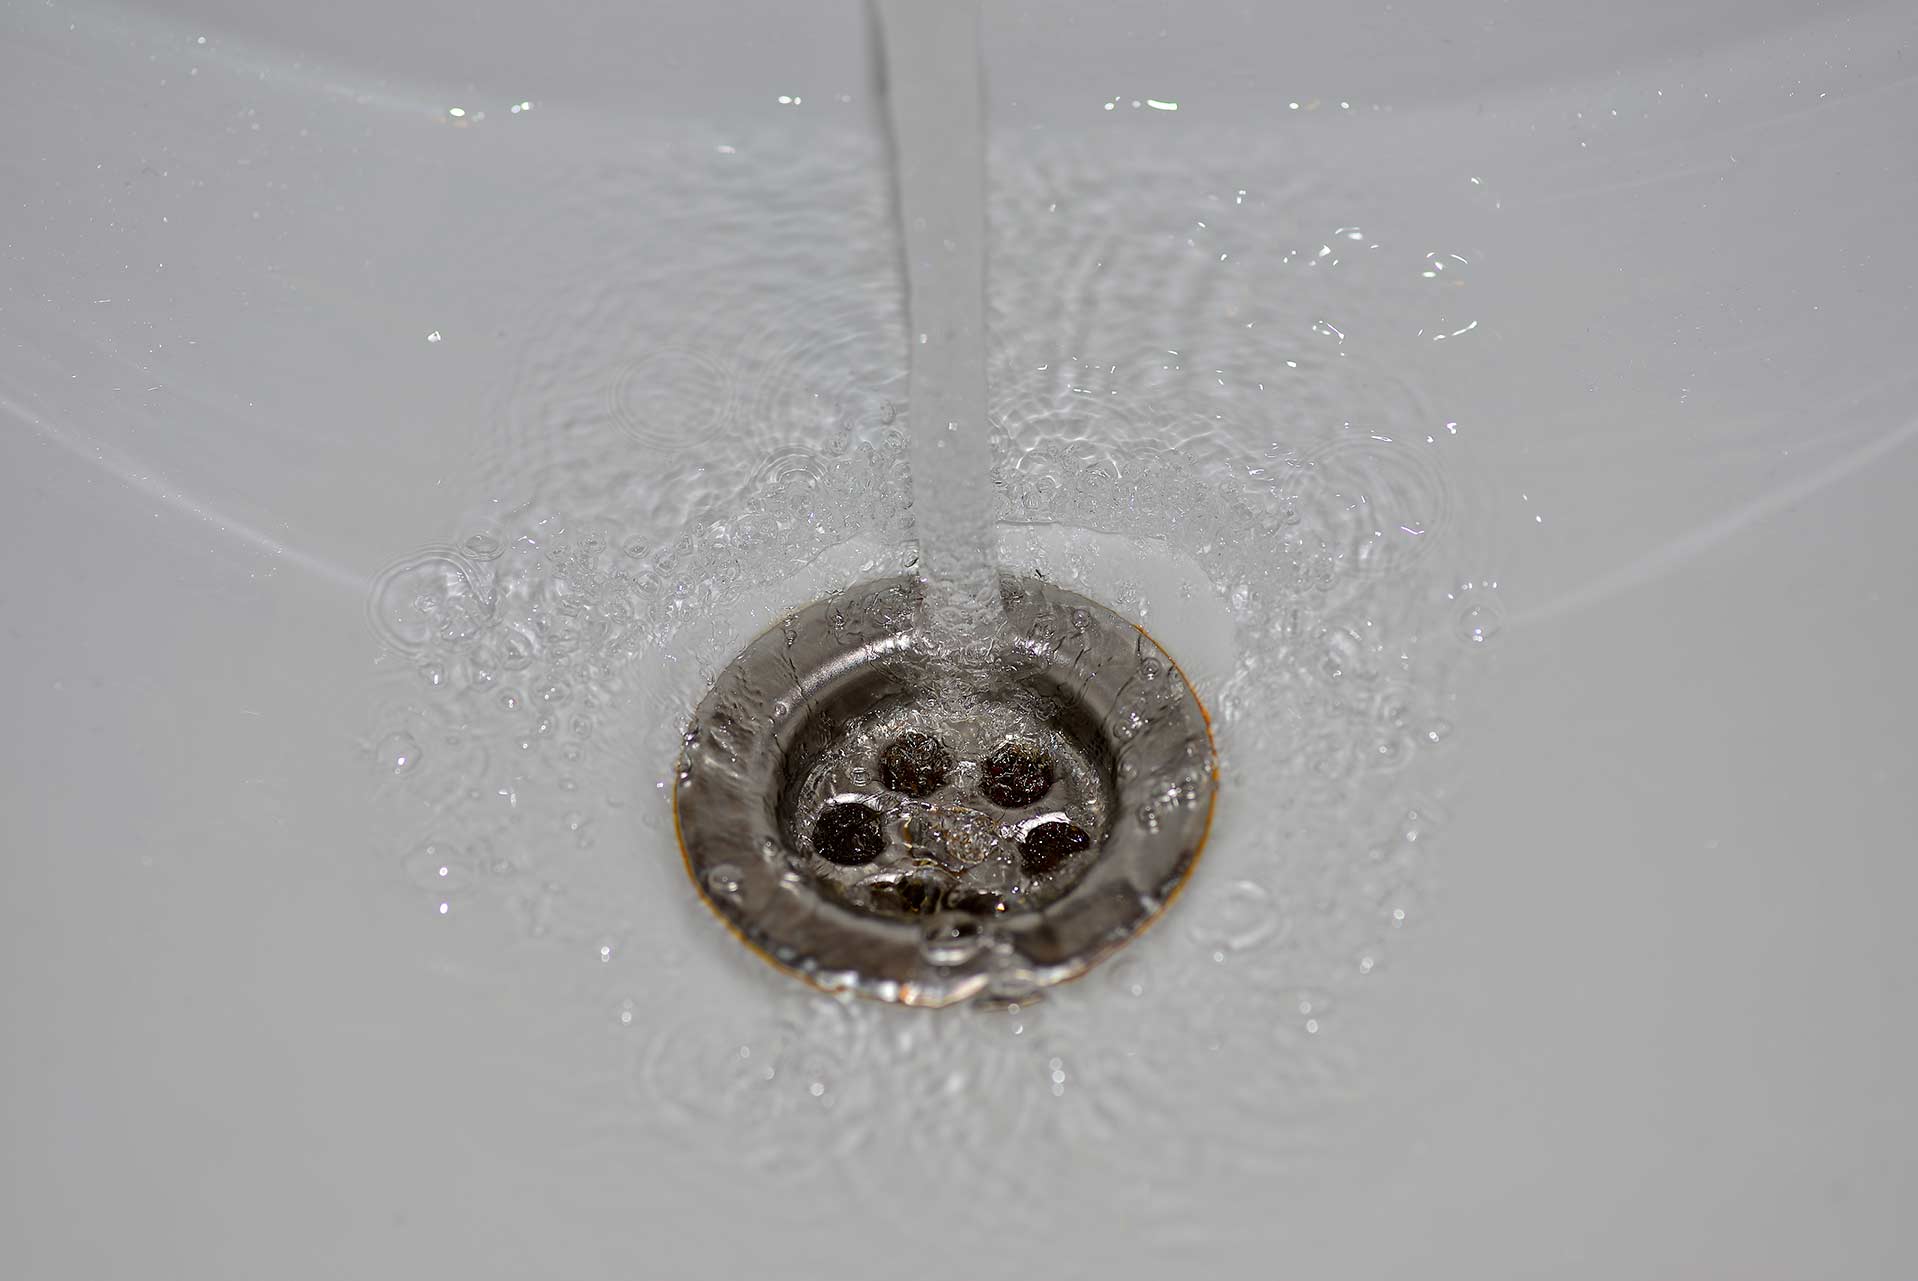 A2B Drains provides services to unblock blocked sinks and drains for properties in Wilmslow.